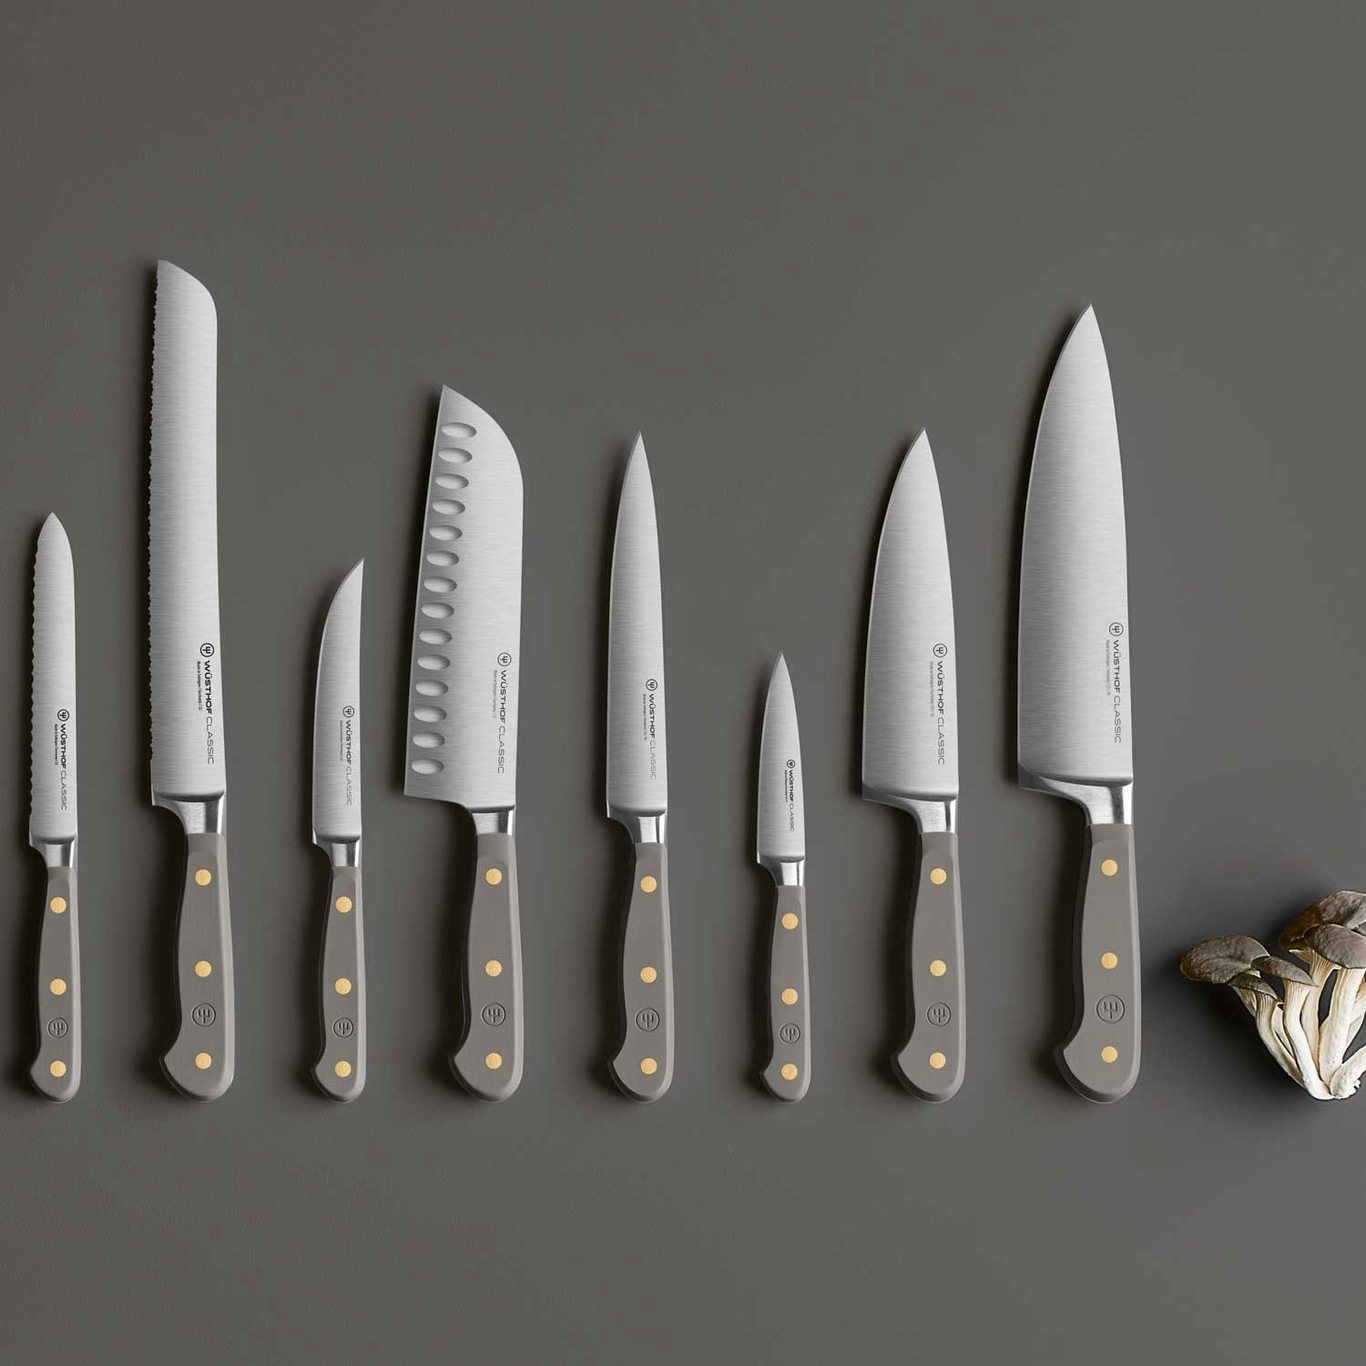 https://royaldesign.com/image/2/wusthof-classic-colour-knife-set-with-knife-block-8-pieces-15?w=800&quality=80